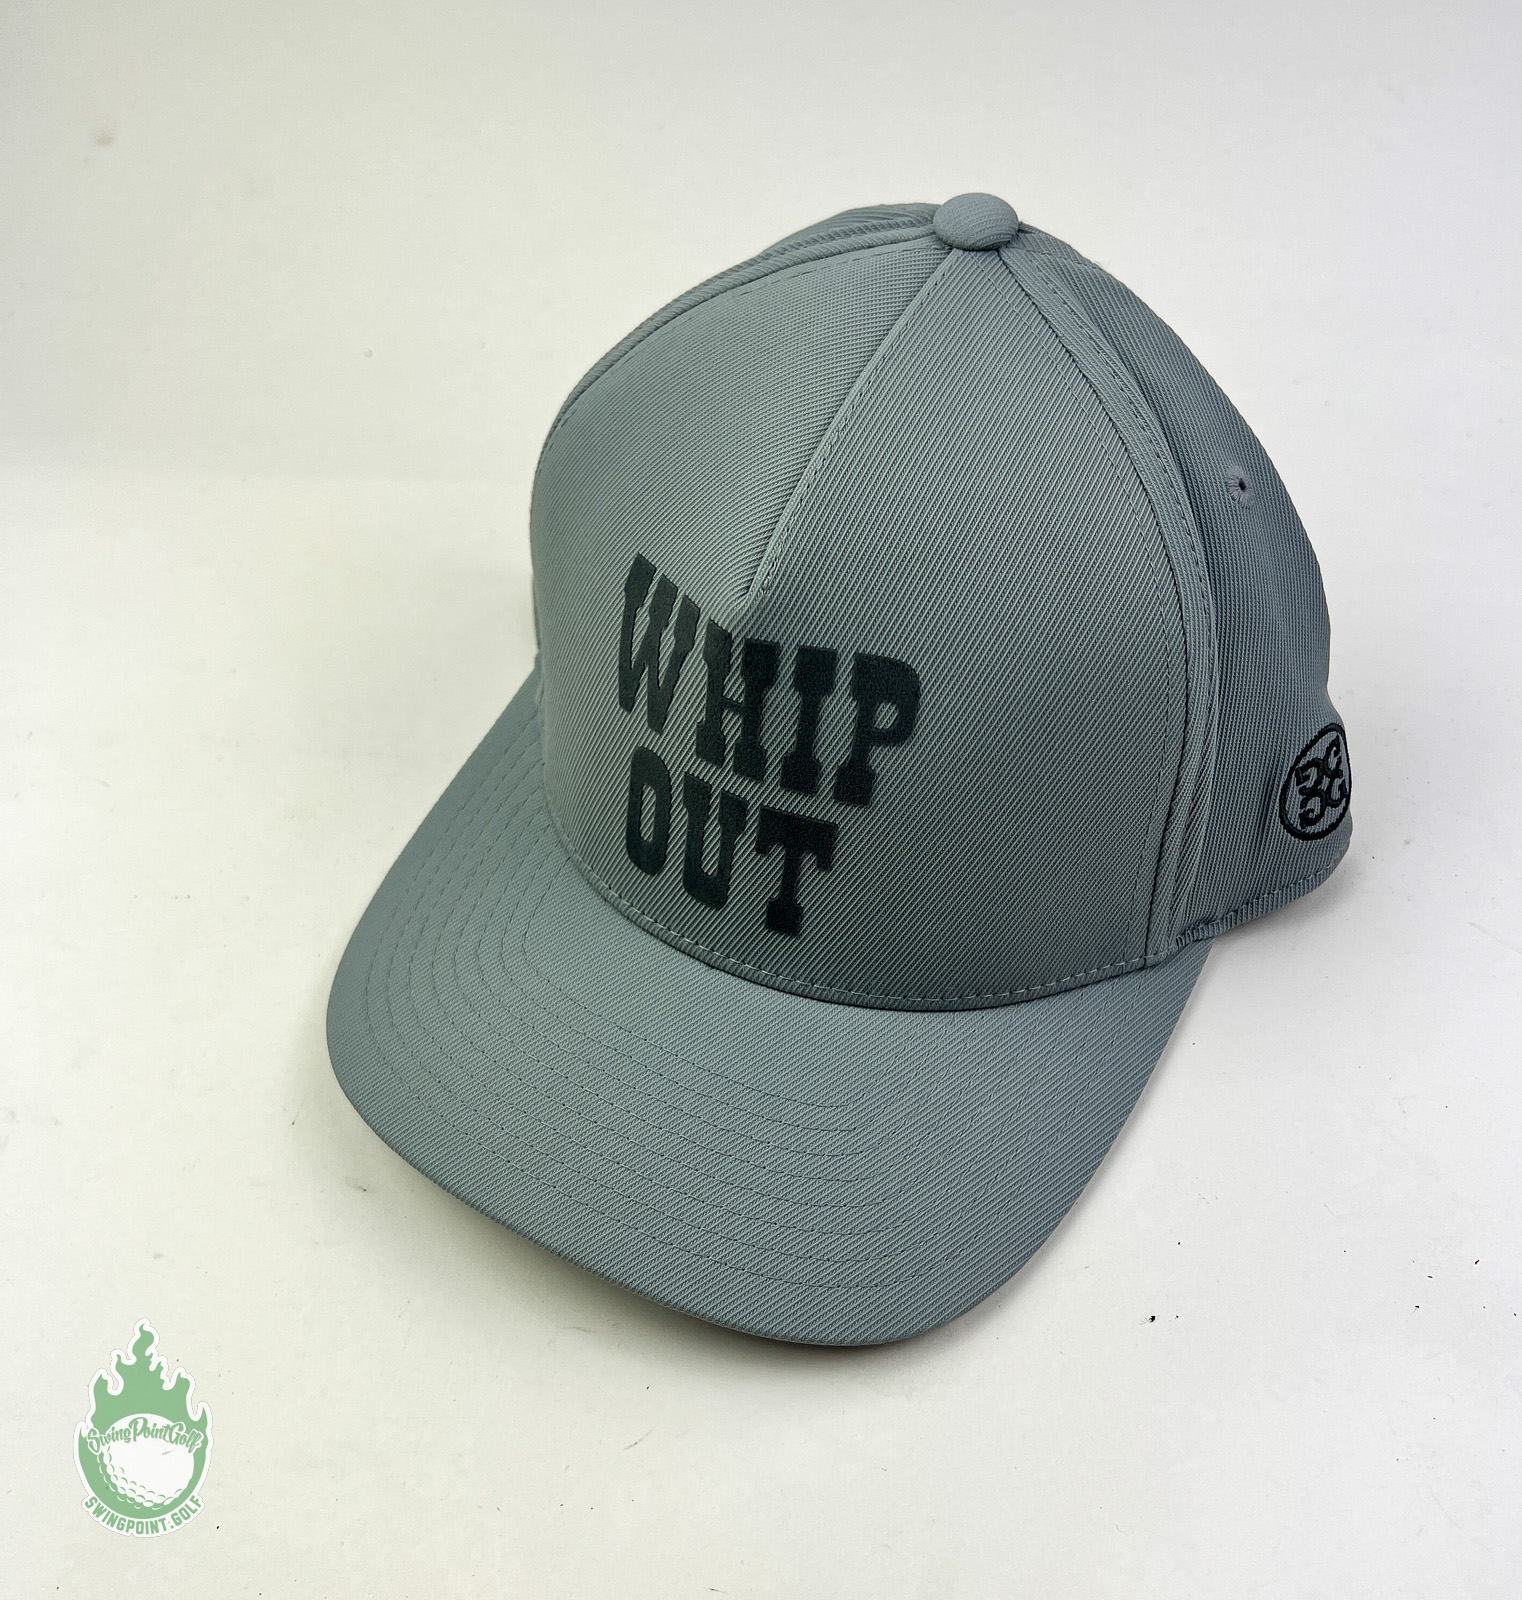 New with Tags G/Fore Grey Cap Trucker Hat Golf® Out Golf Whip SwingPoint Snapback ·